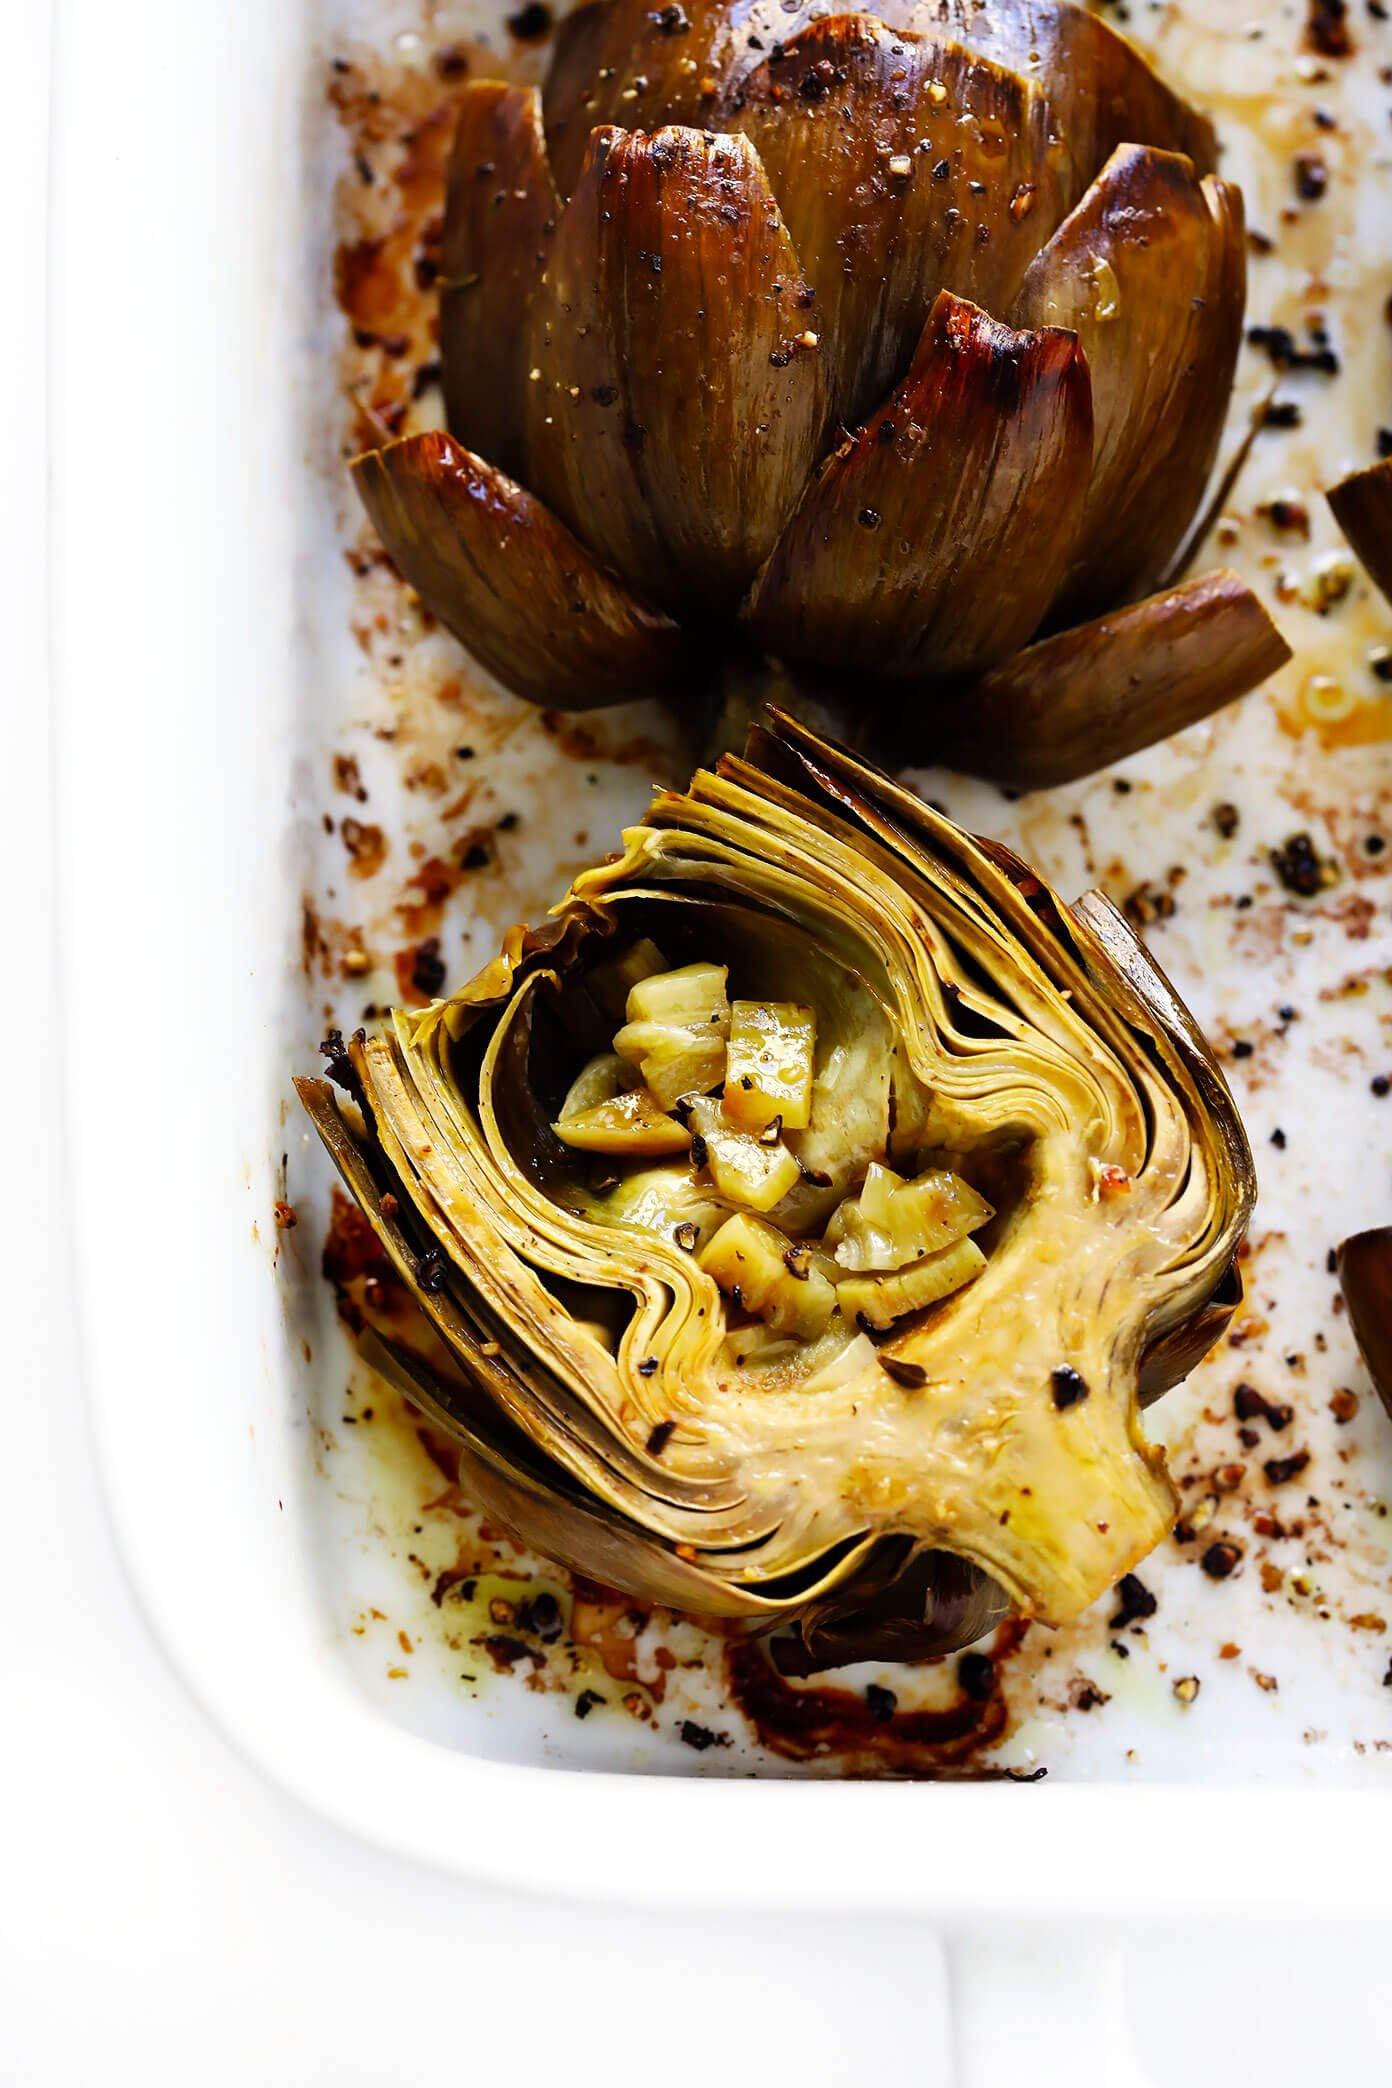 How To Eat Roasted Artichokes